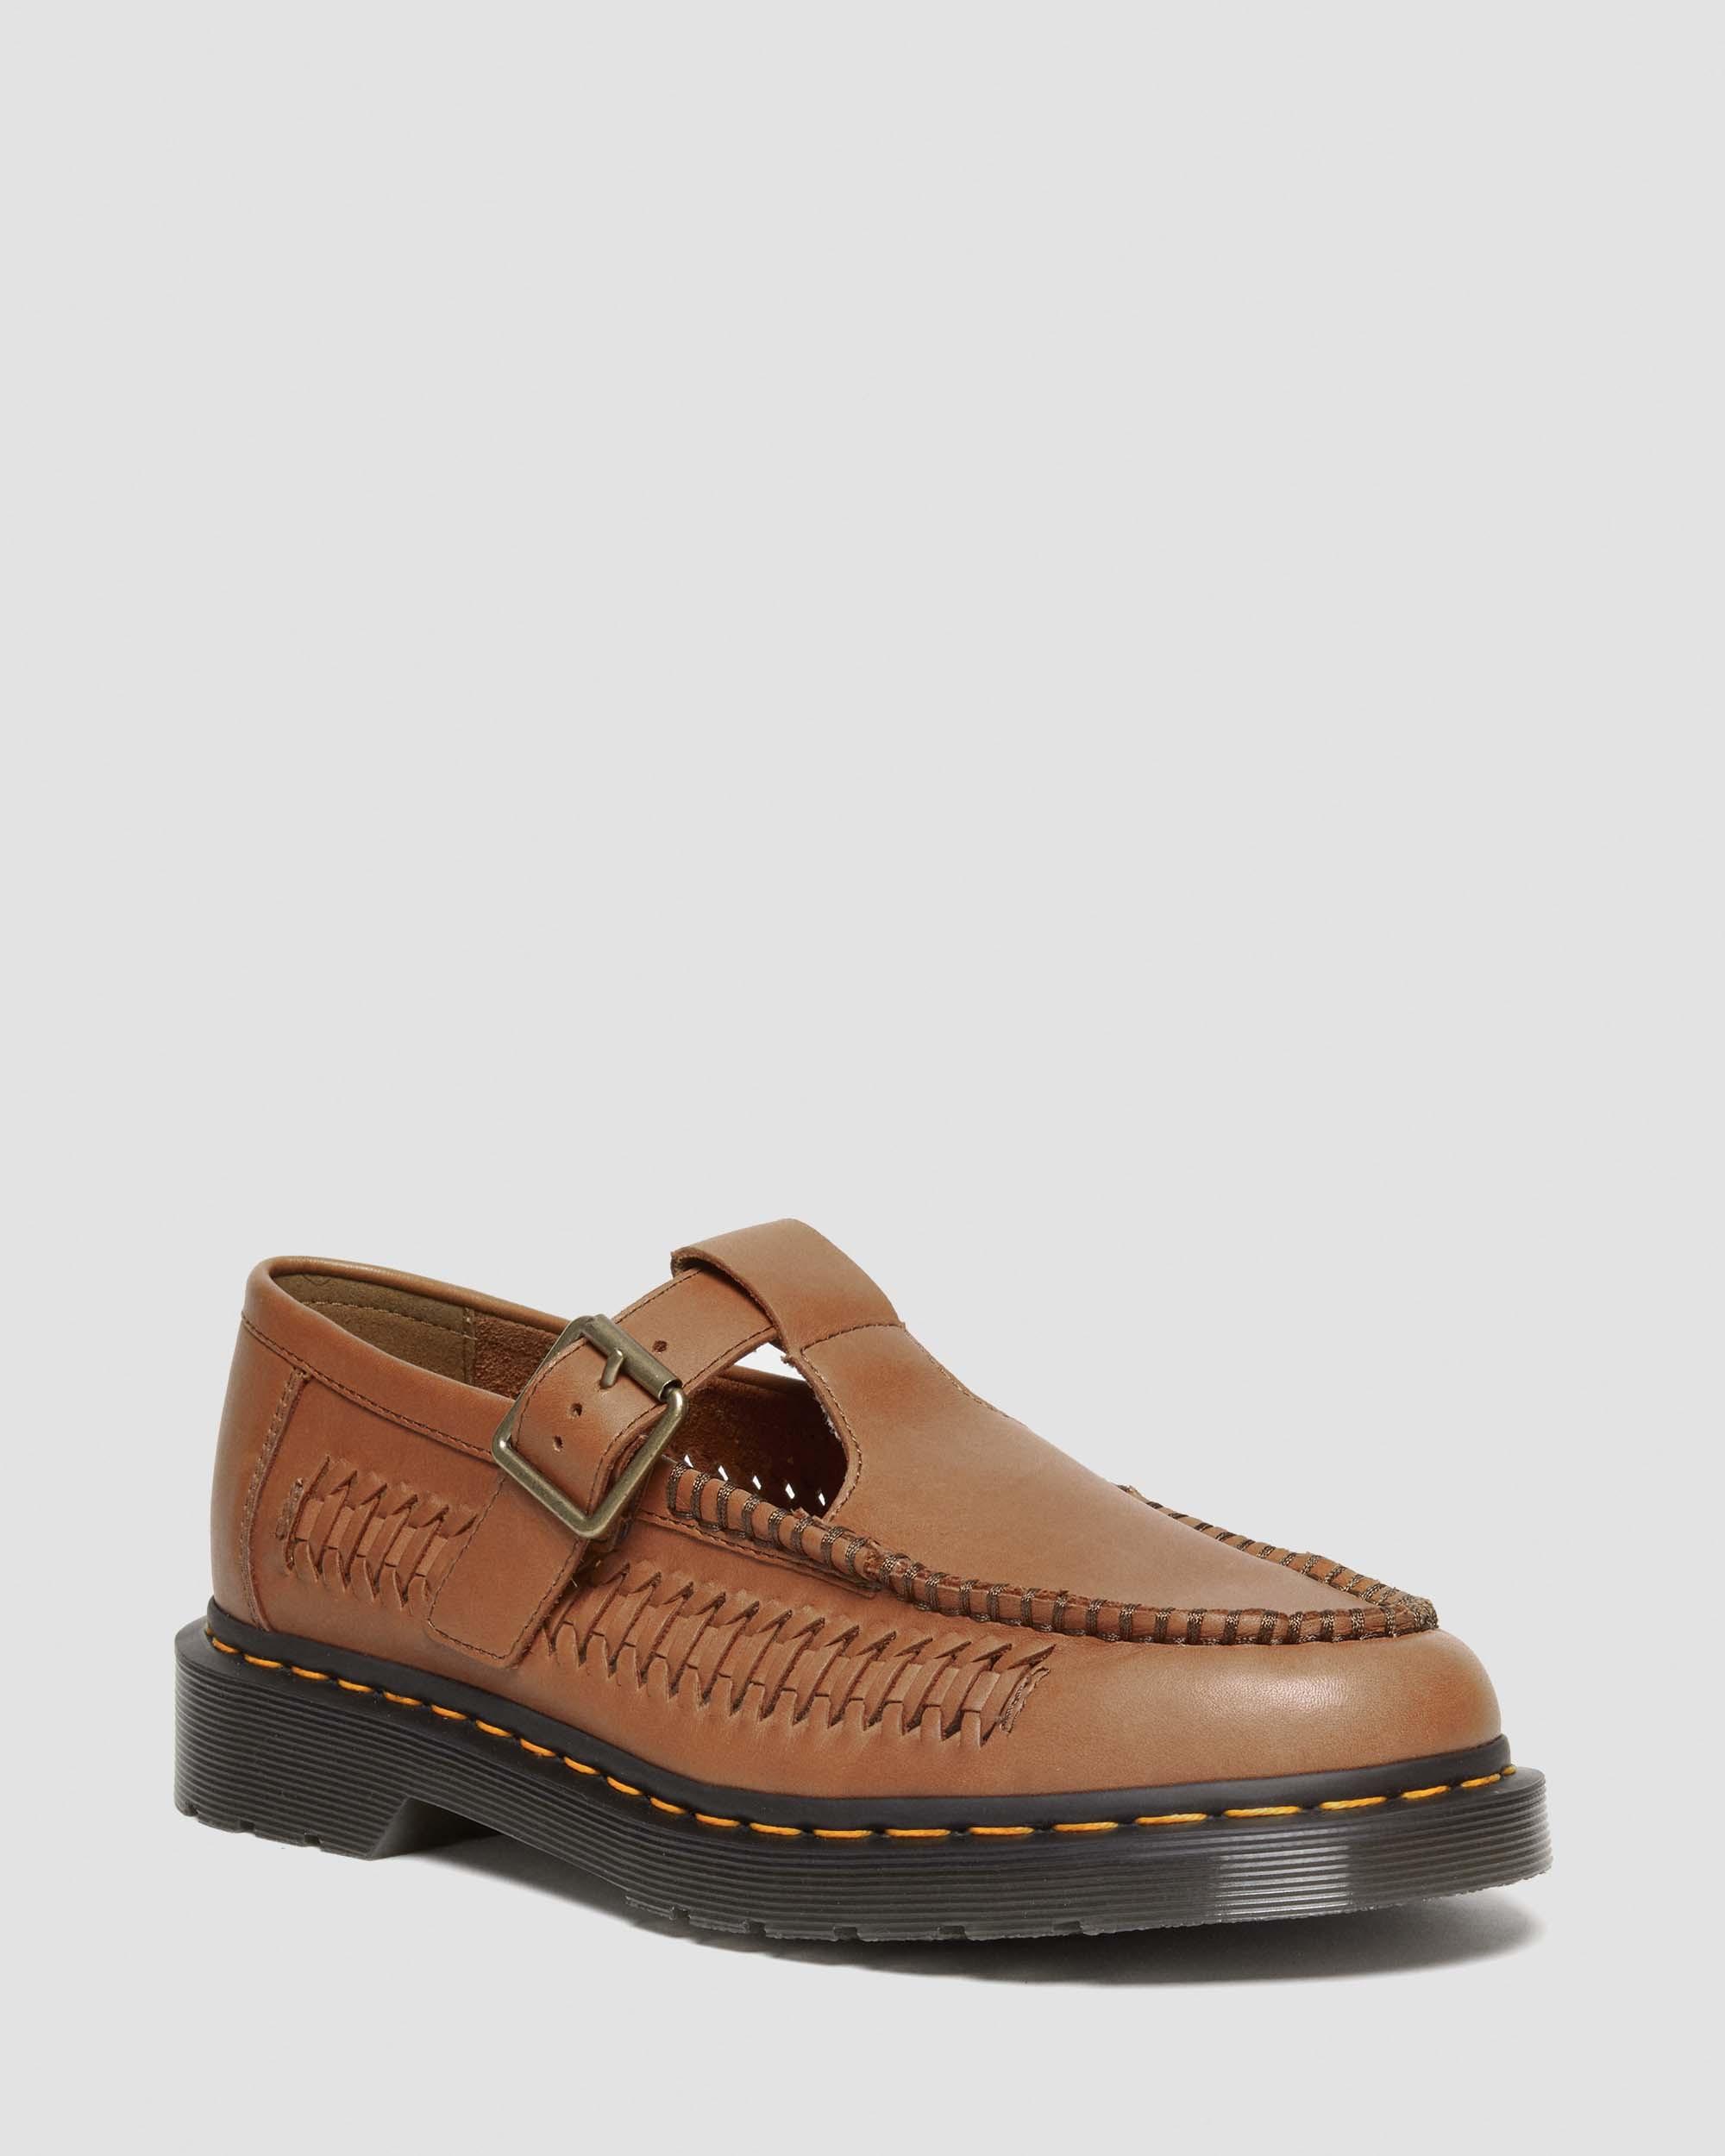 Adrian T-Bar Leather Mary Jane Shoes in British Tan | Dr. Martens